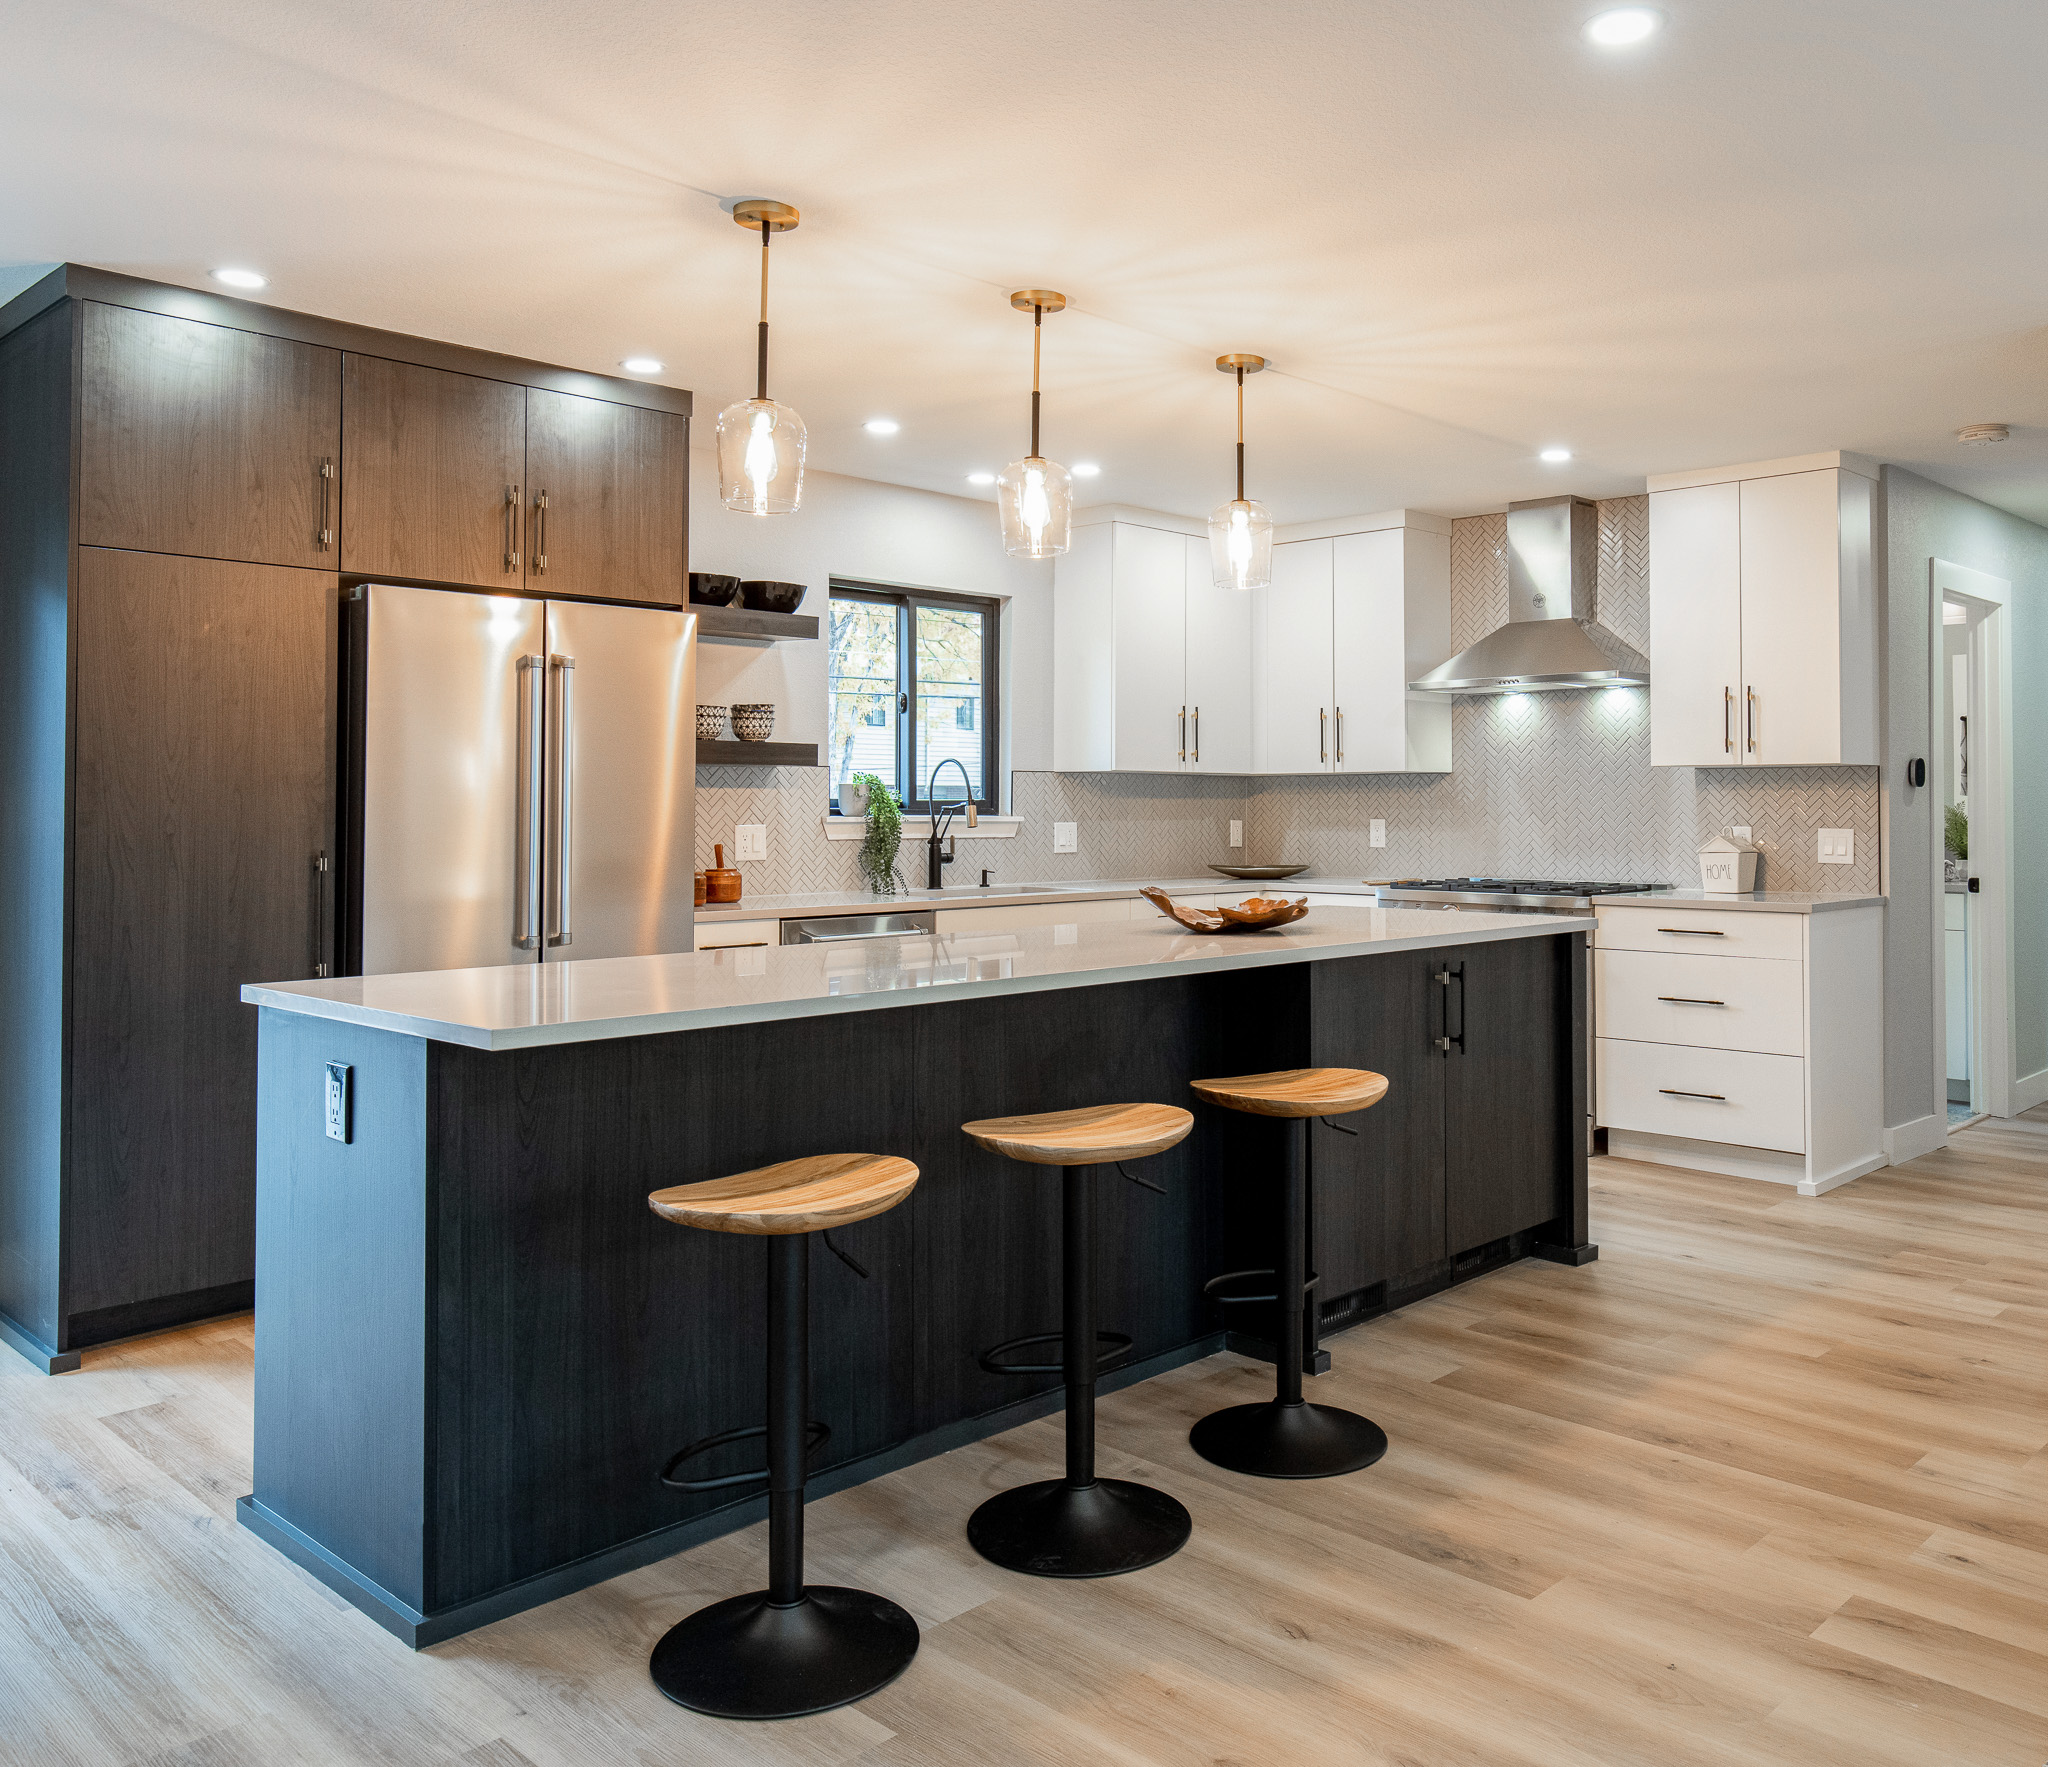 A center island with three barstools stands at the center of a newly renovated kitchen.